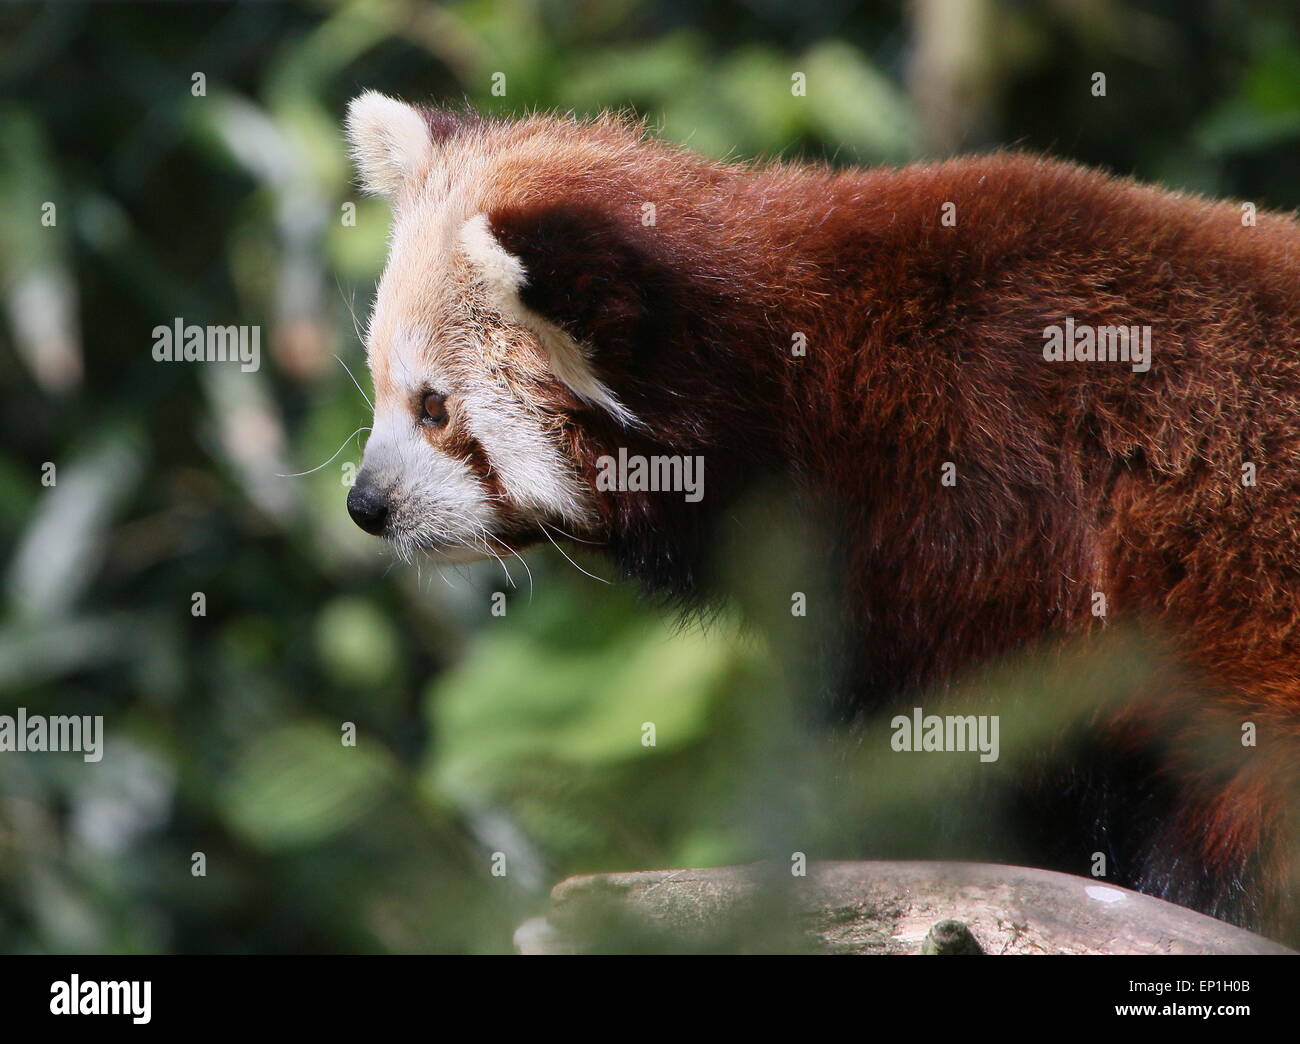 Asian Red Panda (Ailurus fulgens) at Ouwehands Dierenpark Zoo, Rhenen, The Netherlands Stock Photo